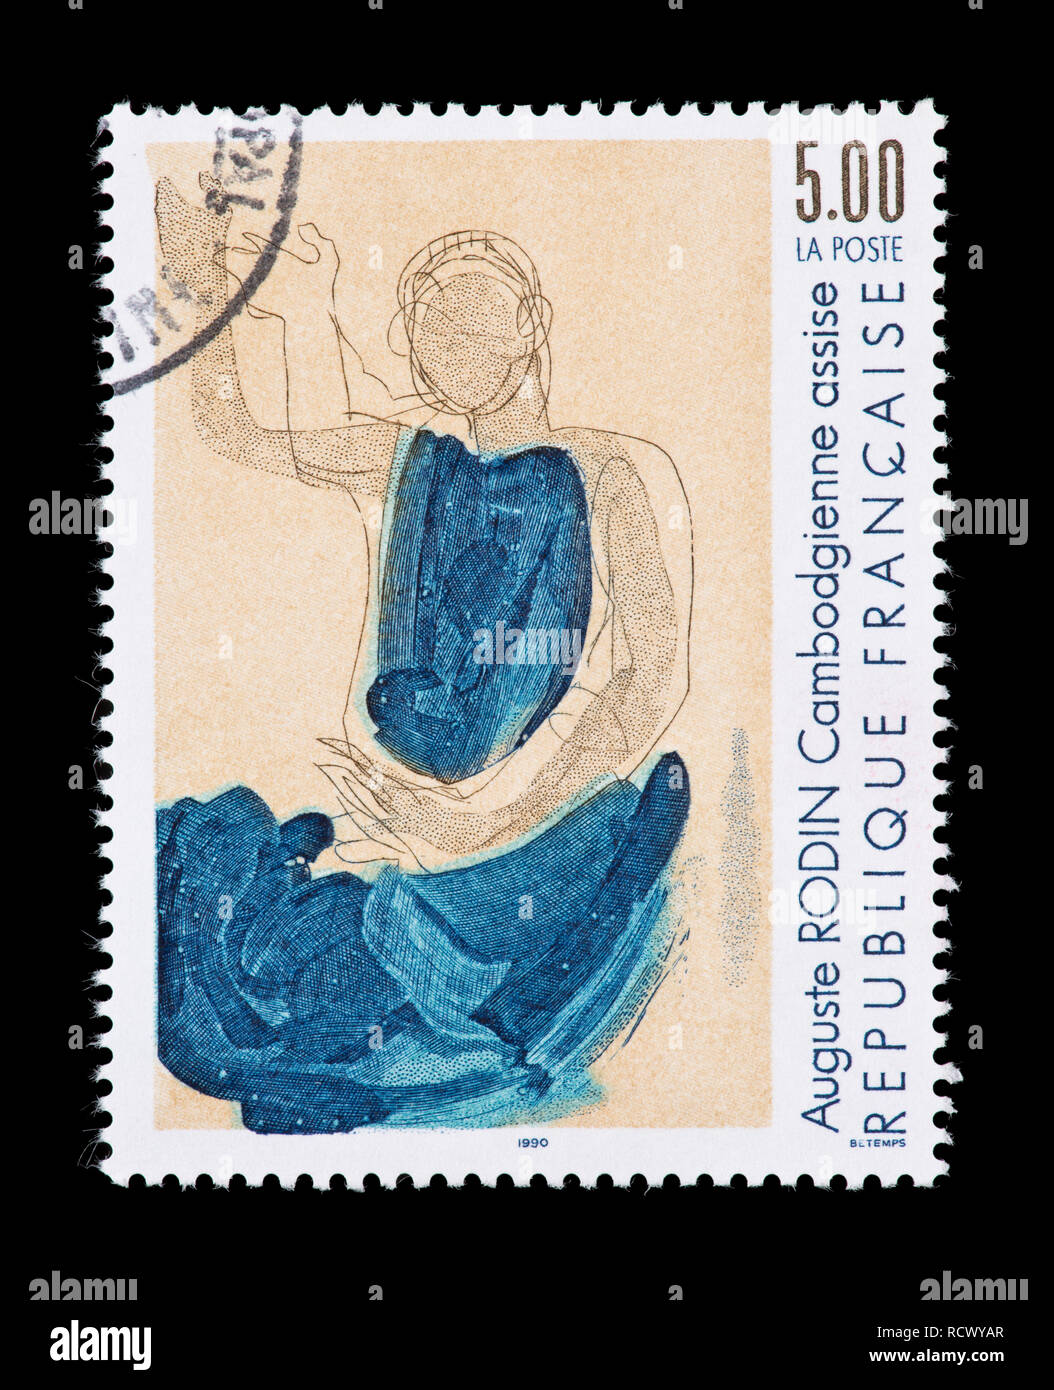 Postage stamp from France depicting the Auguste Rodin painting Cambodian Dancer Stock Photo